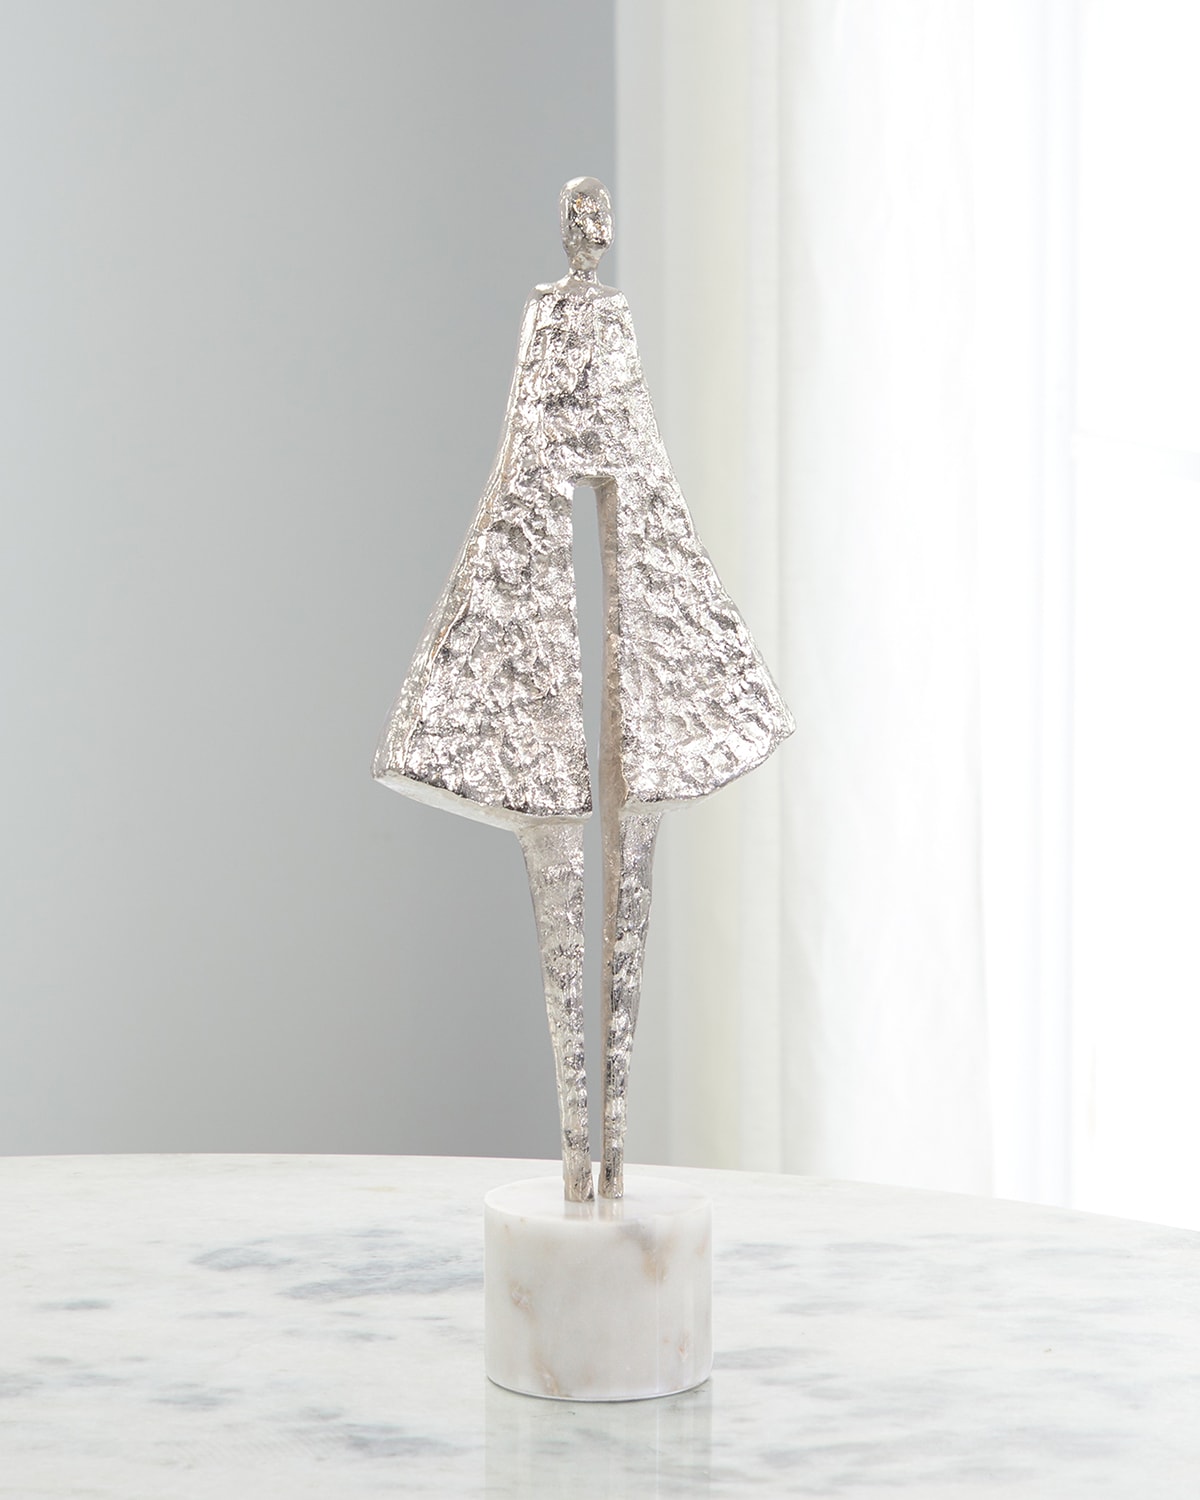 Shop John-richard Collection Candid Silhouette Sculpture On Marble, 24" Tall In Silver